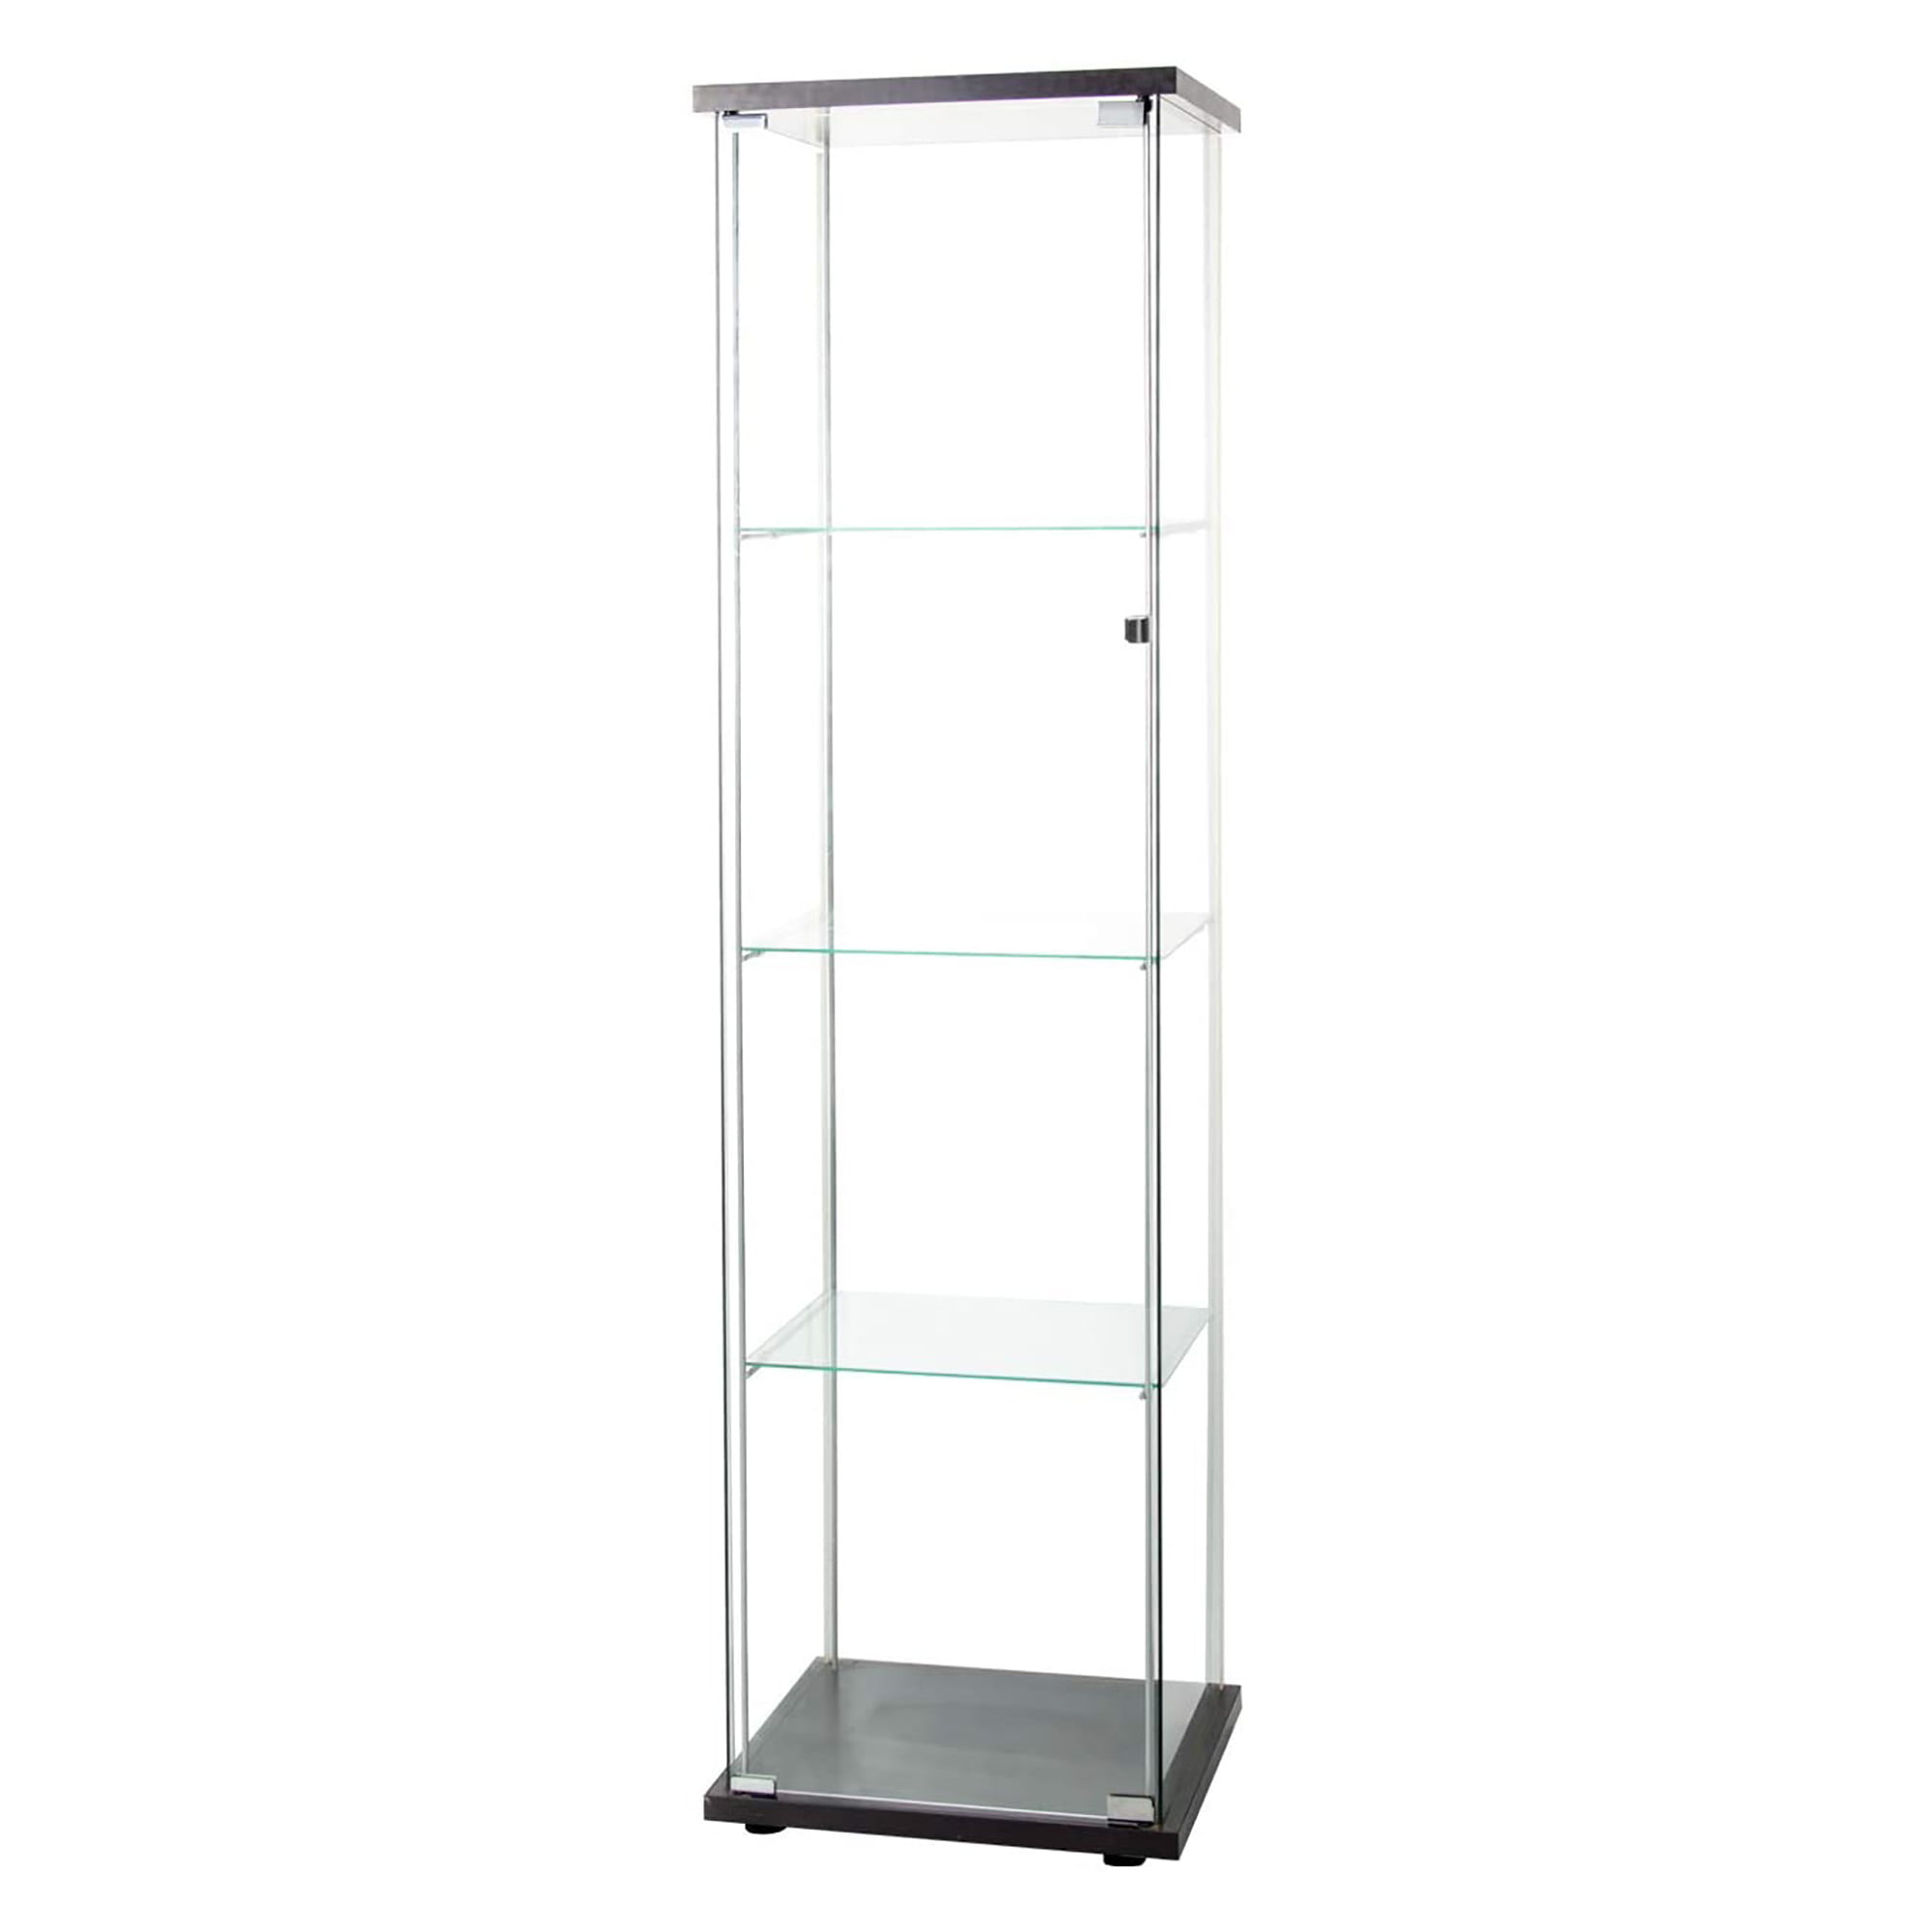 White, 64 x 17x 14.5 inches 4-Shelf Display Case Cabinet with Glass Doors,Rectangular Clear Curio Cabinet Floor Standing Jewelry Display Cabinet Home Furnishings